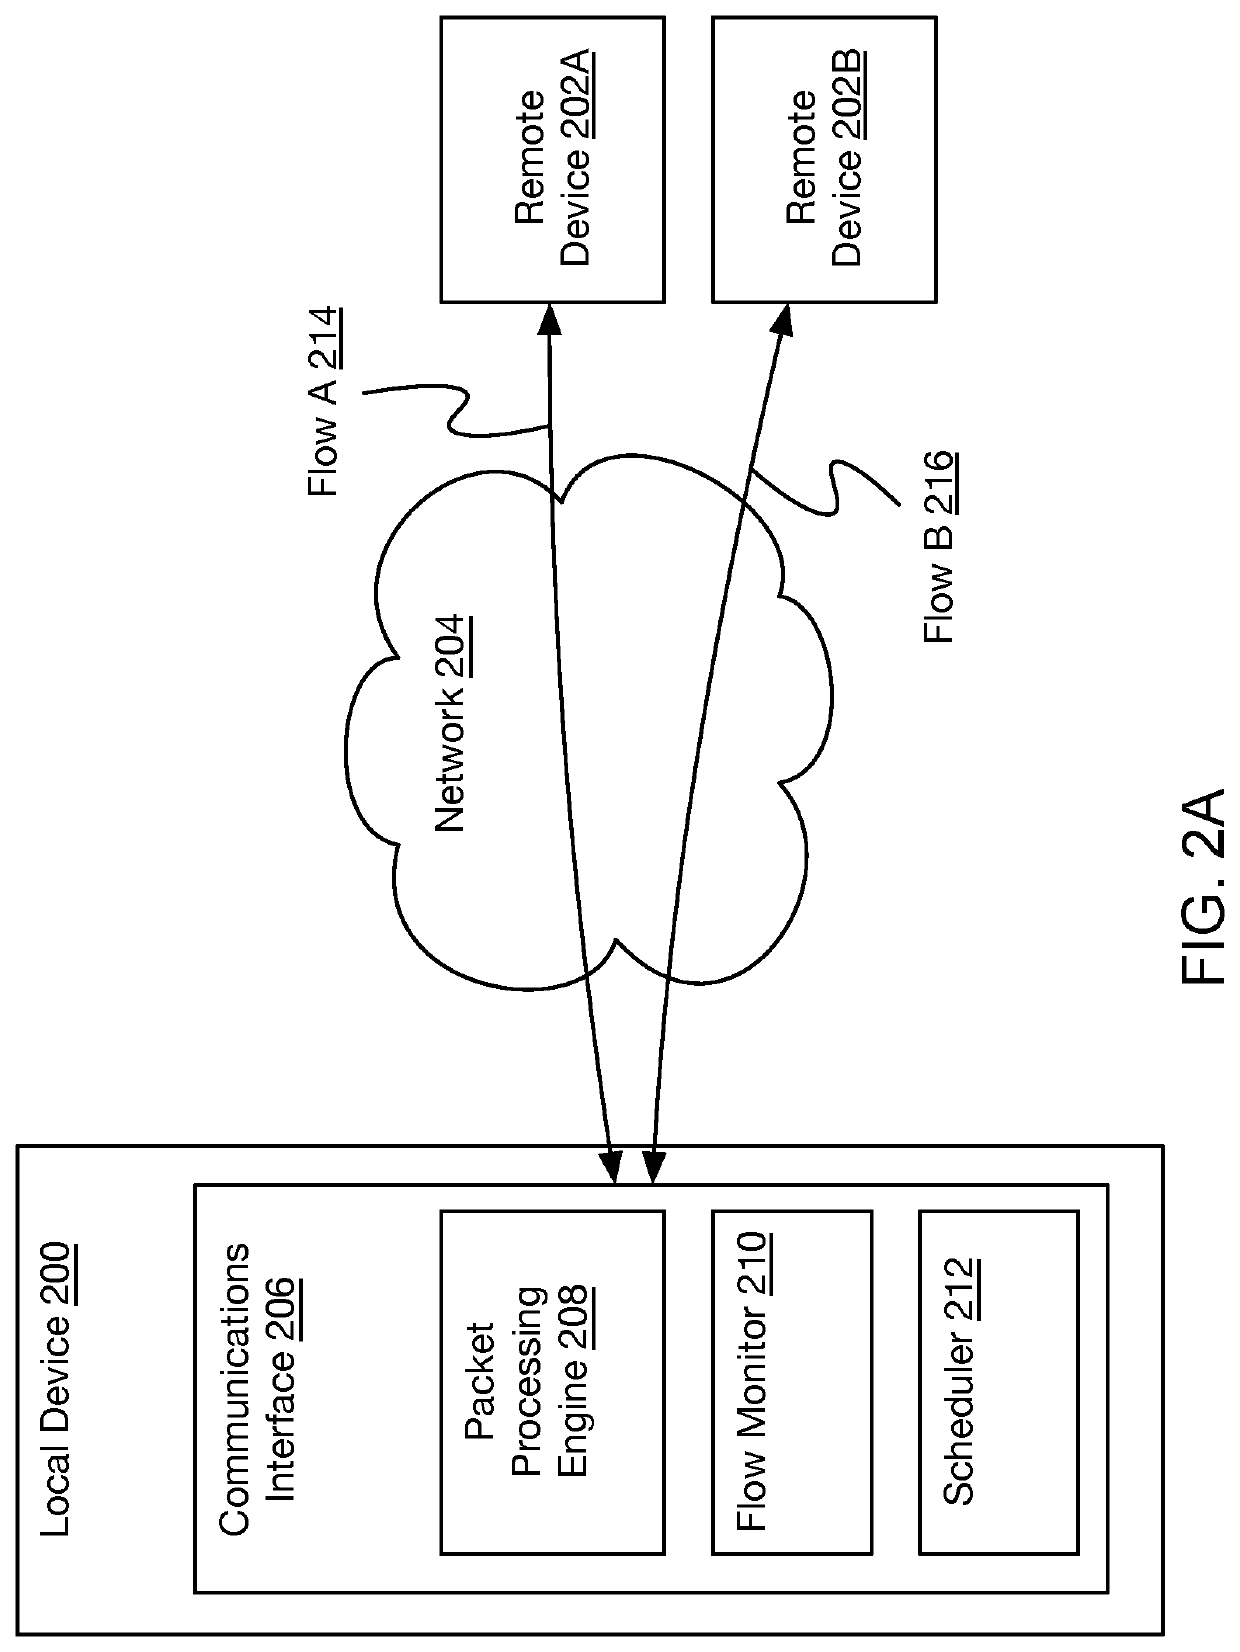 Method to measure relative QOS gains and to reduce the variance in QOS for similar connections for during bandwidth contention